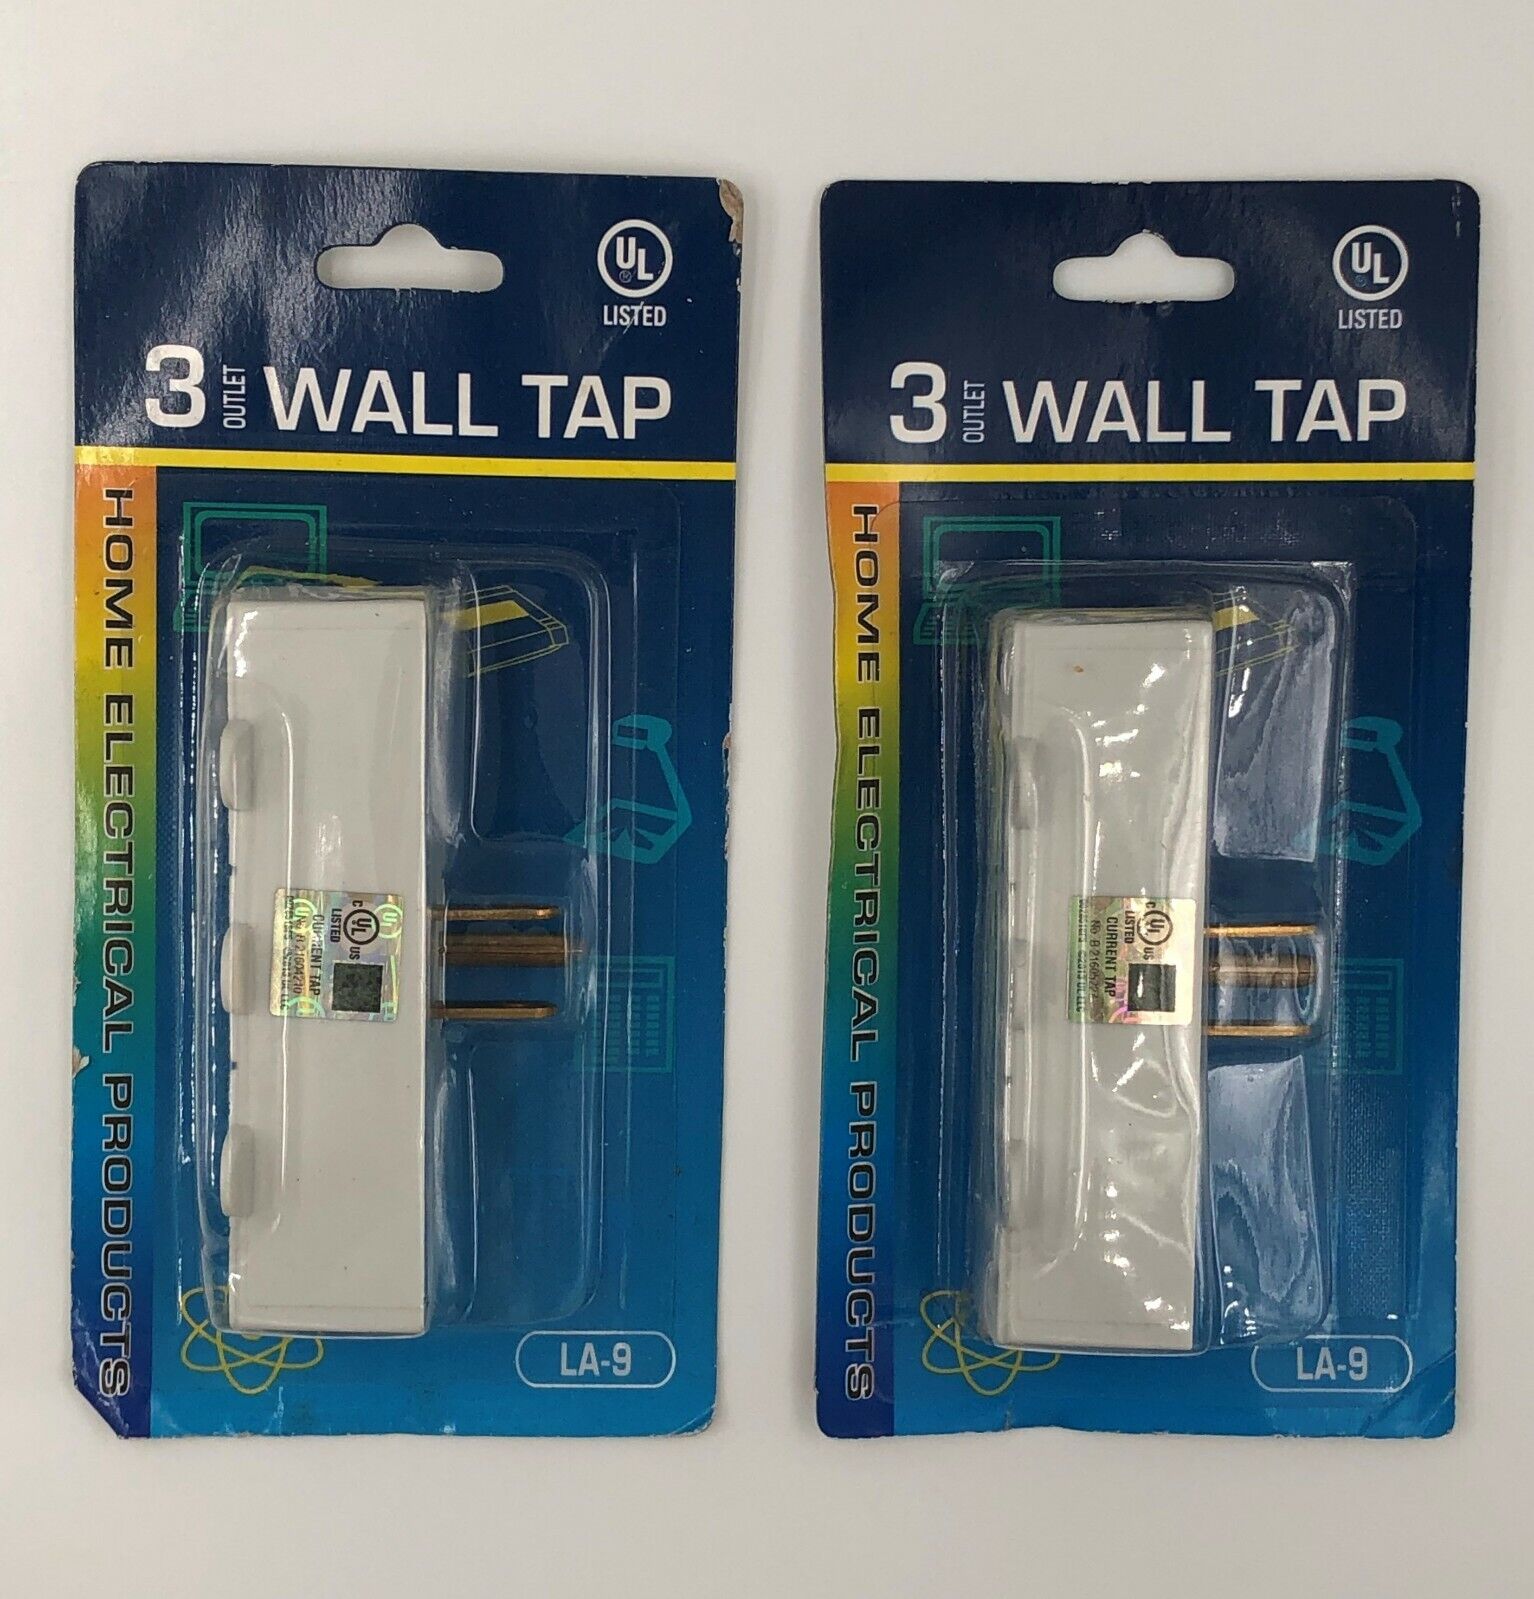 3 Way Outlet Wall Tap LA-9 UL Listed Powtech PT7803BB